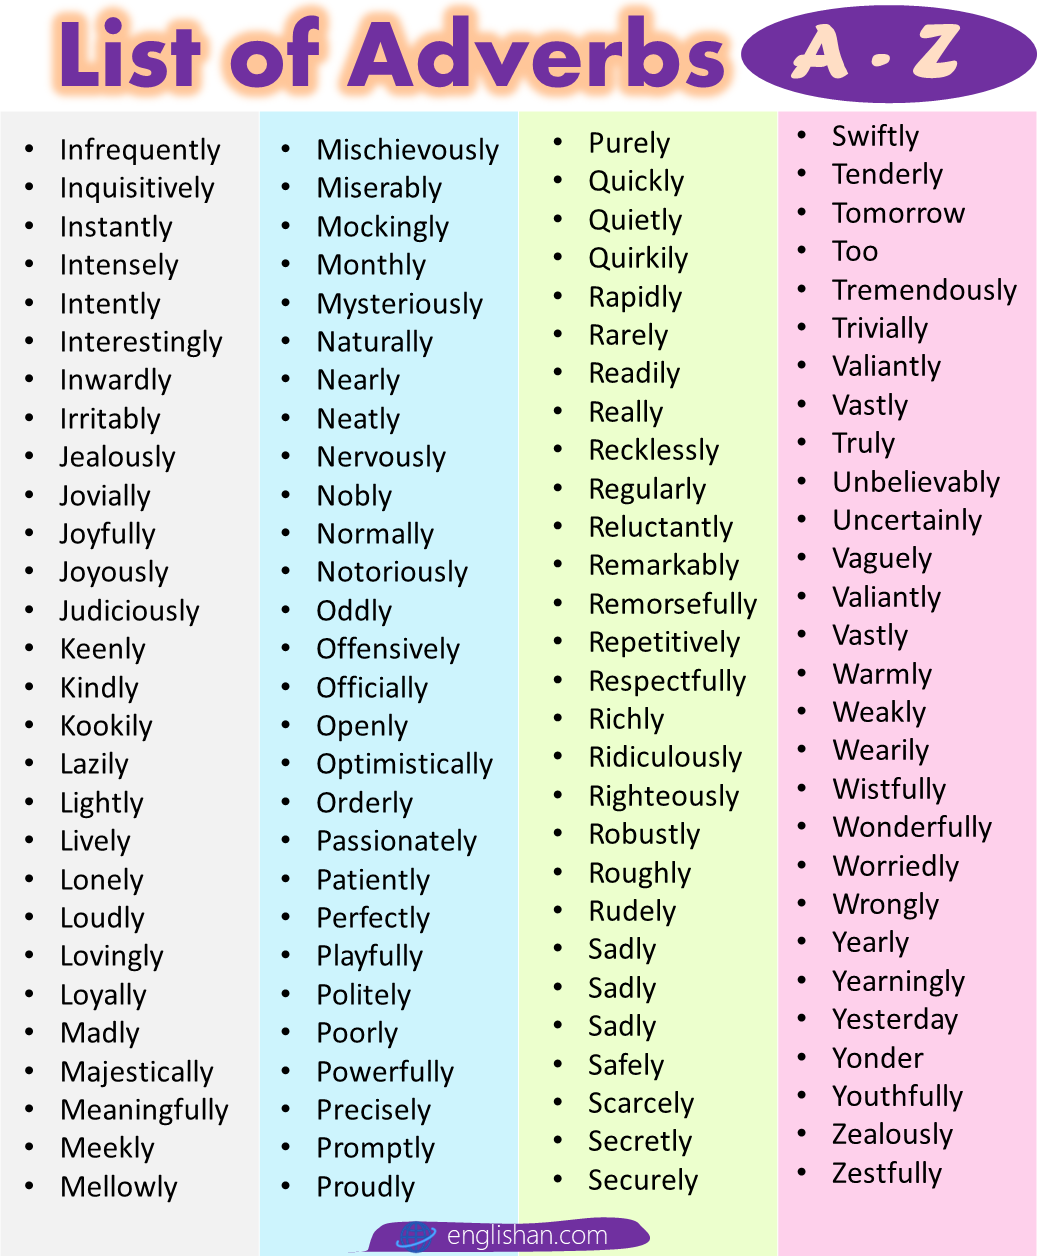 Adverbs in English A to Z